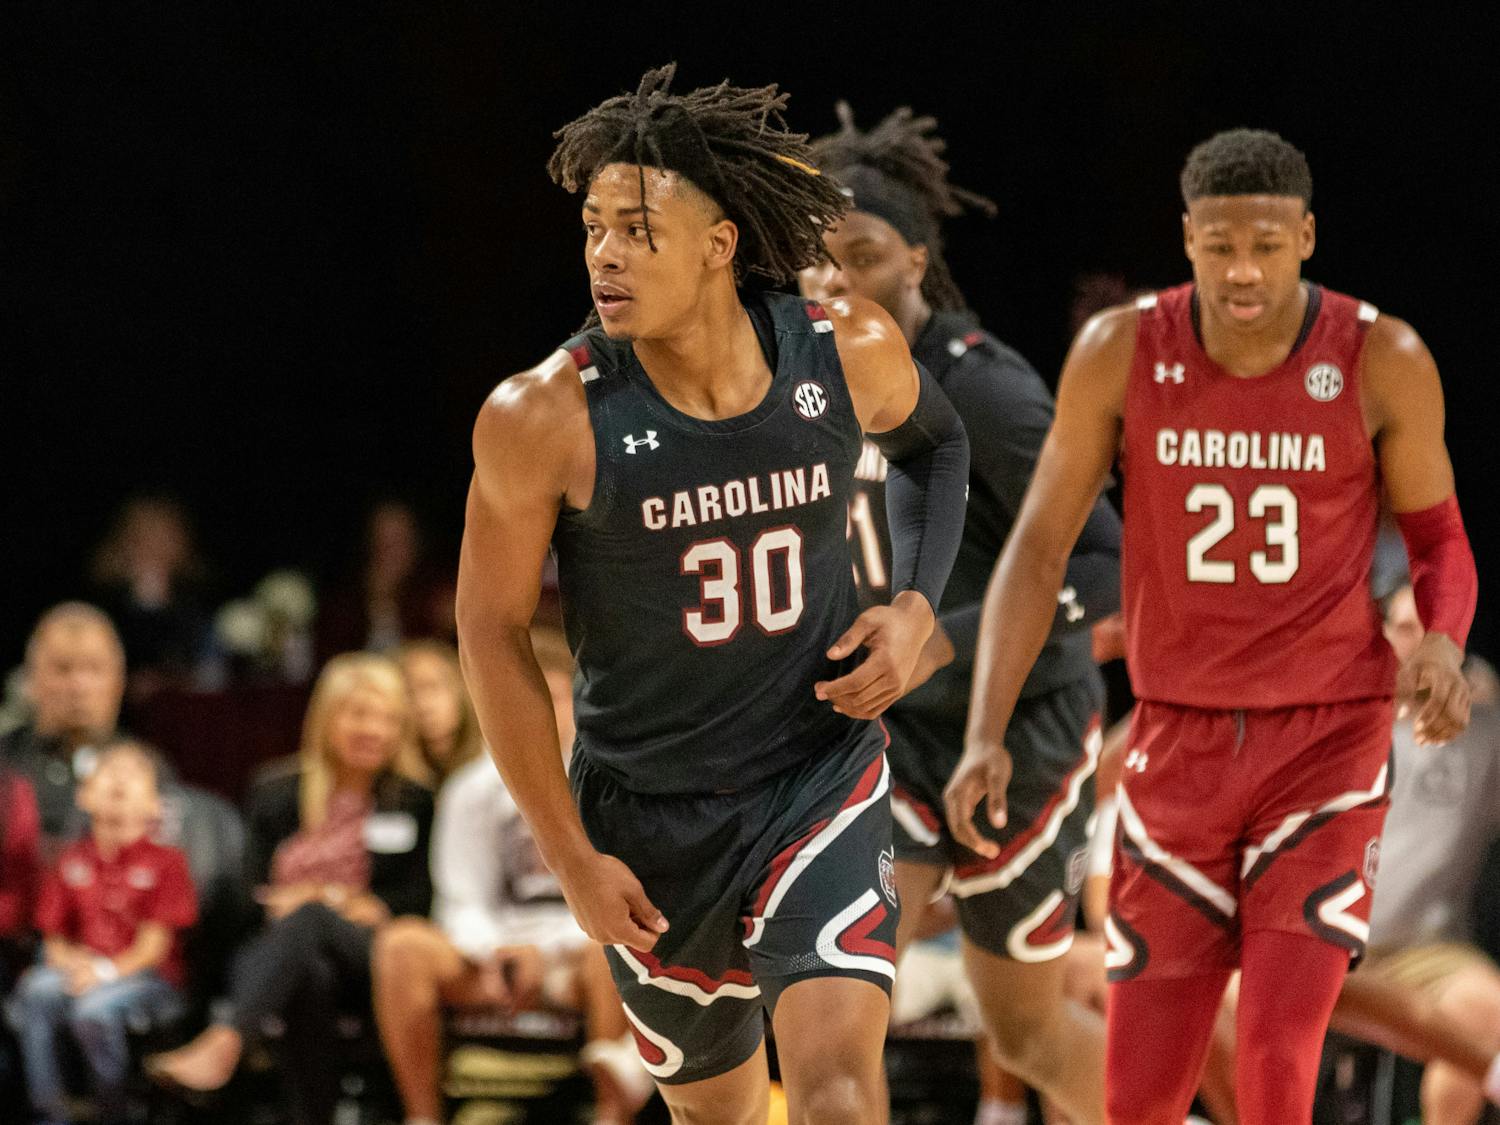 Freshman forward Daniel Hankins-Sanford runs back down the court to play defense after making a three-pointer during an intrateam scrimmage on Oct. 26, 2022. The men's basketball team hosted the Garnet &amp; Black Madness event.